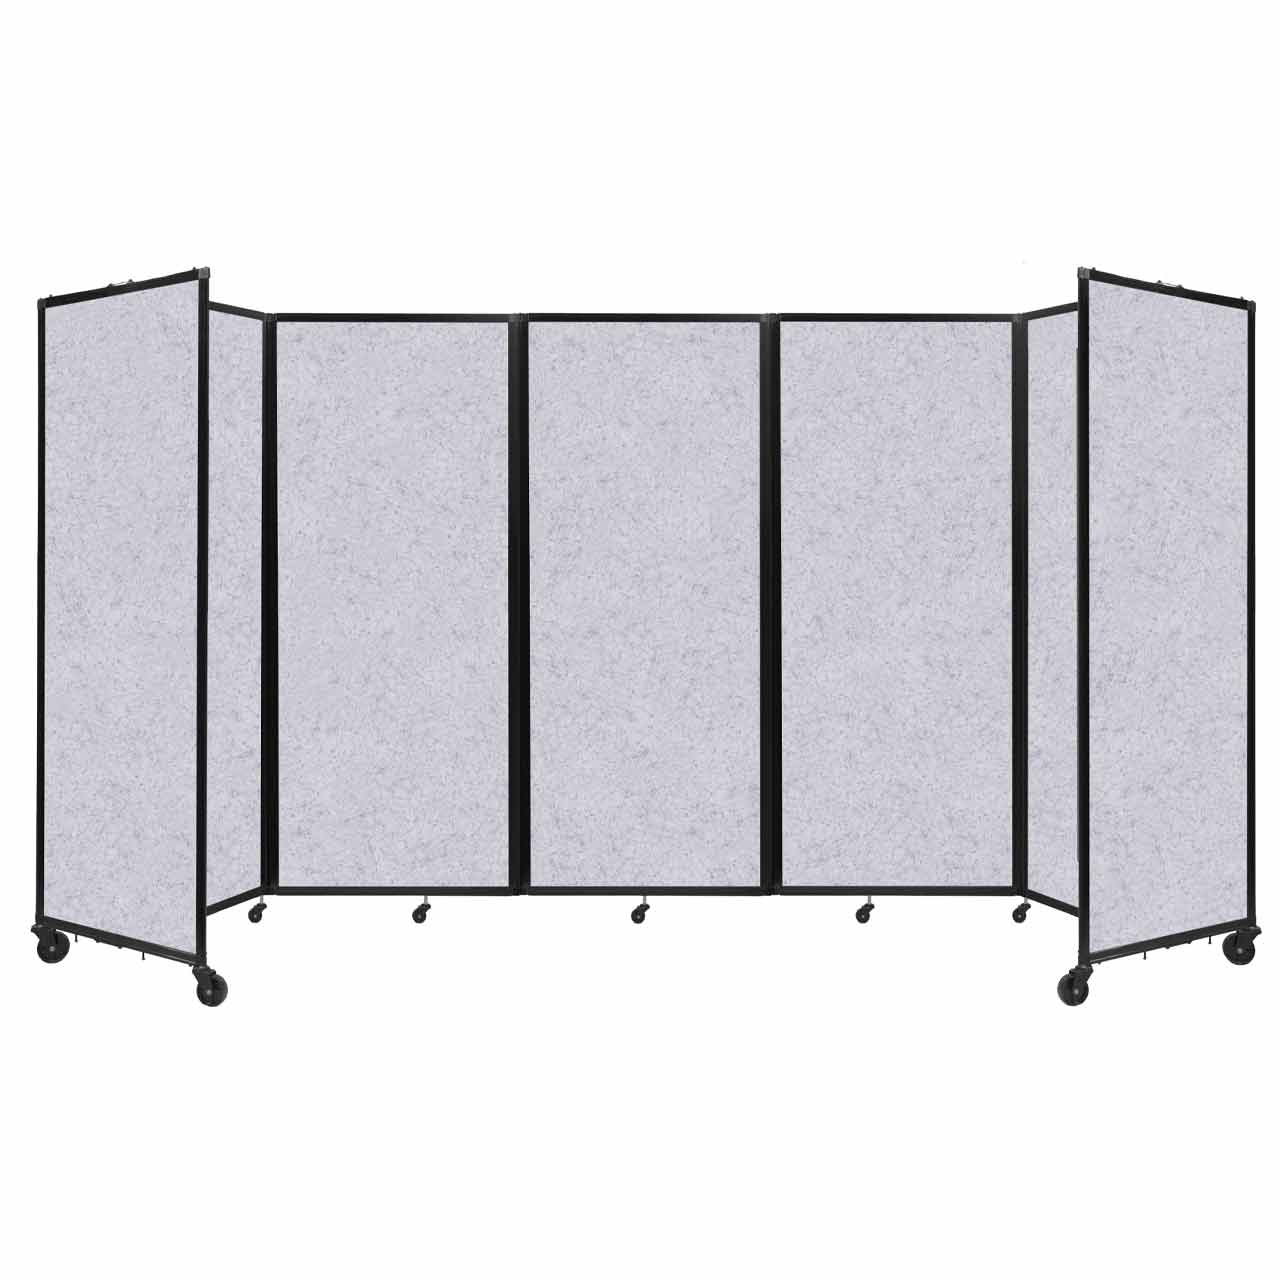 Room Divider 360° Folding Portable Partition with Soundsorb Acoustical Fabric Panels, 14' W x 6' 10" H